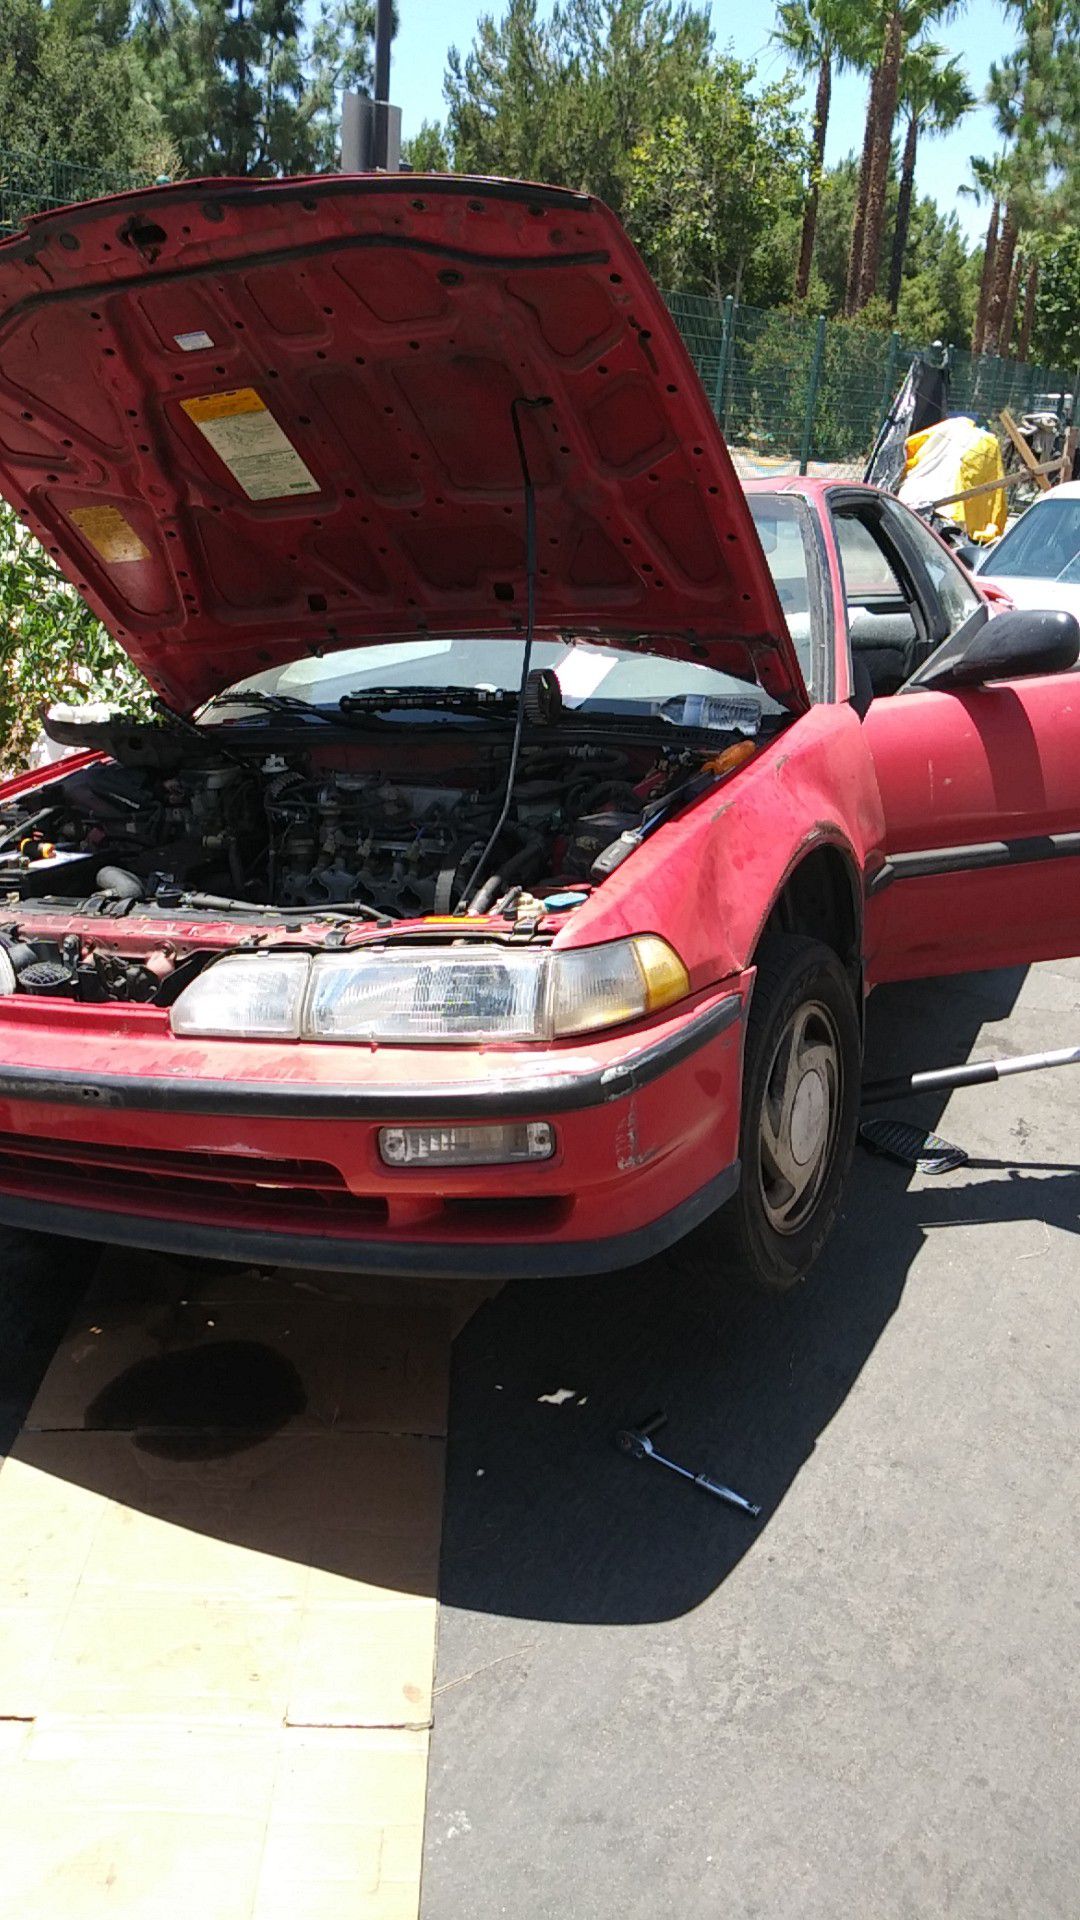 B18A1 engine for sale!!! Off integra (part out)